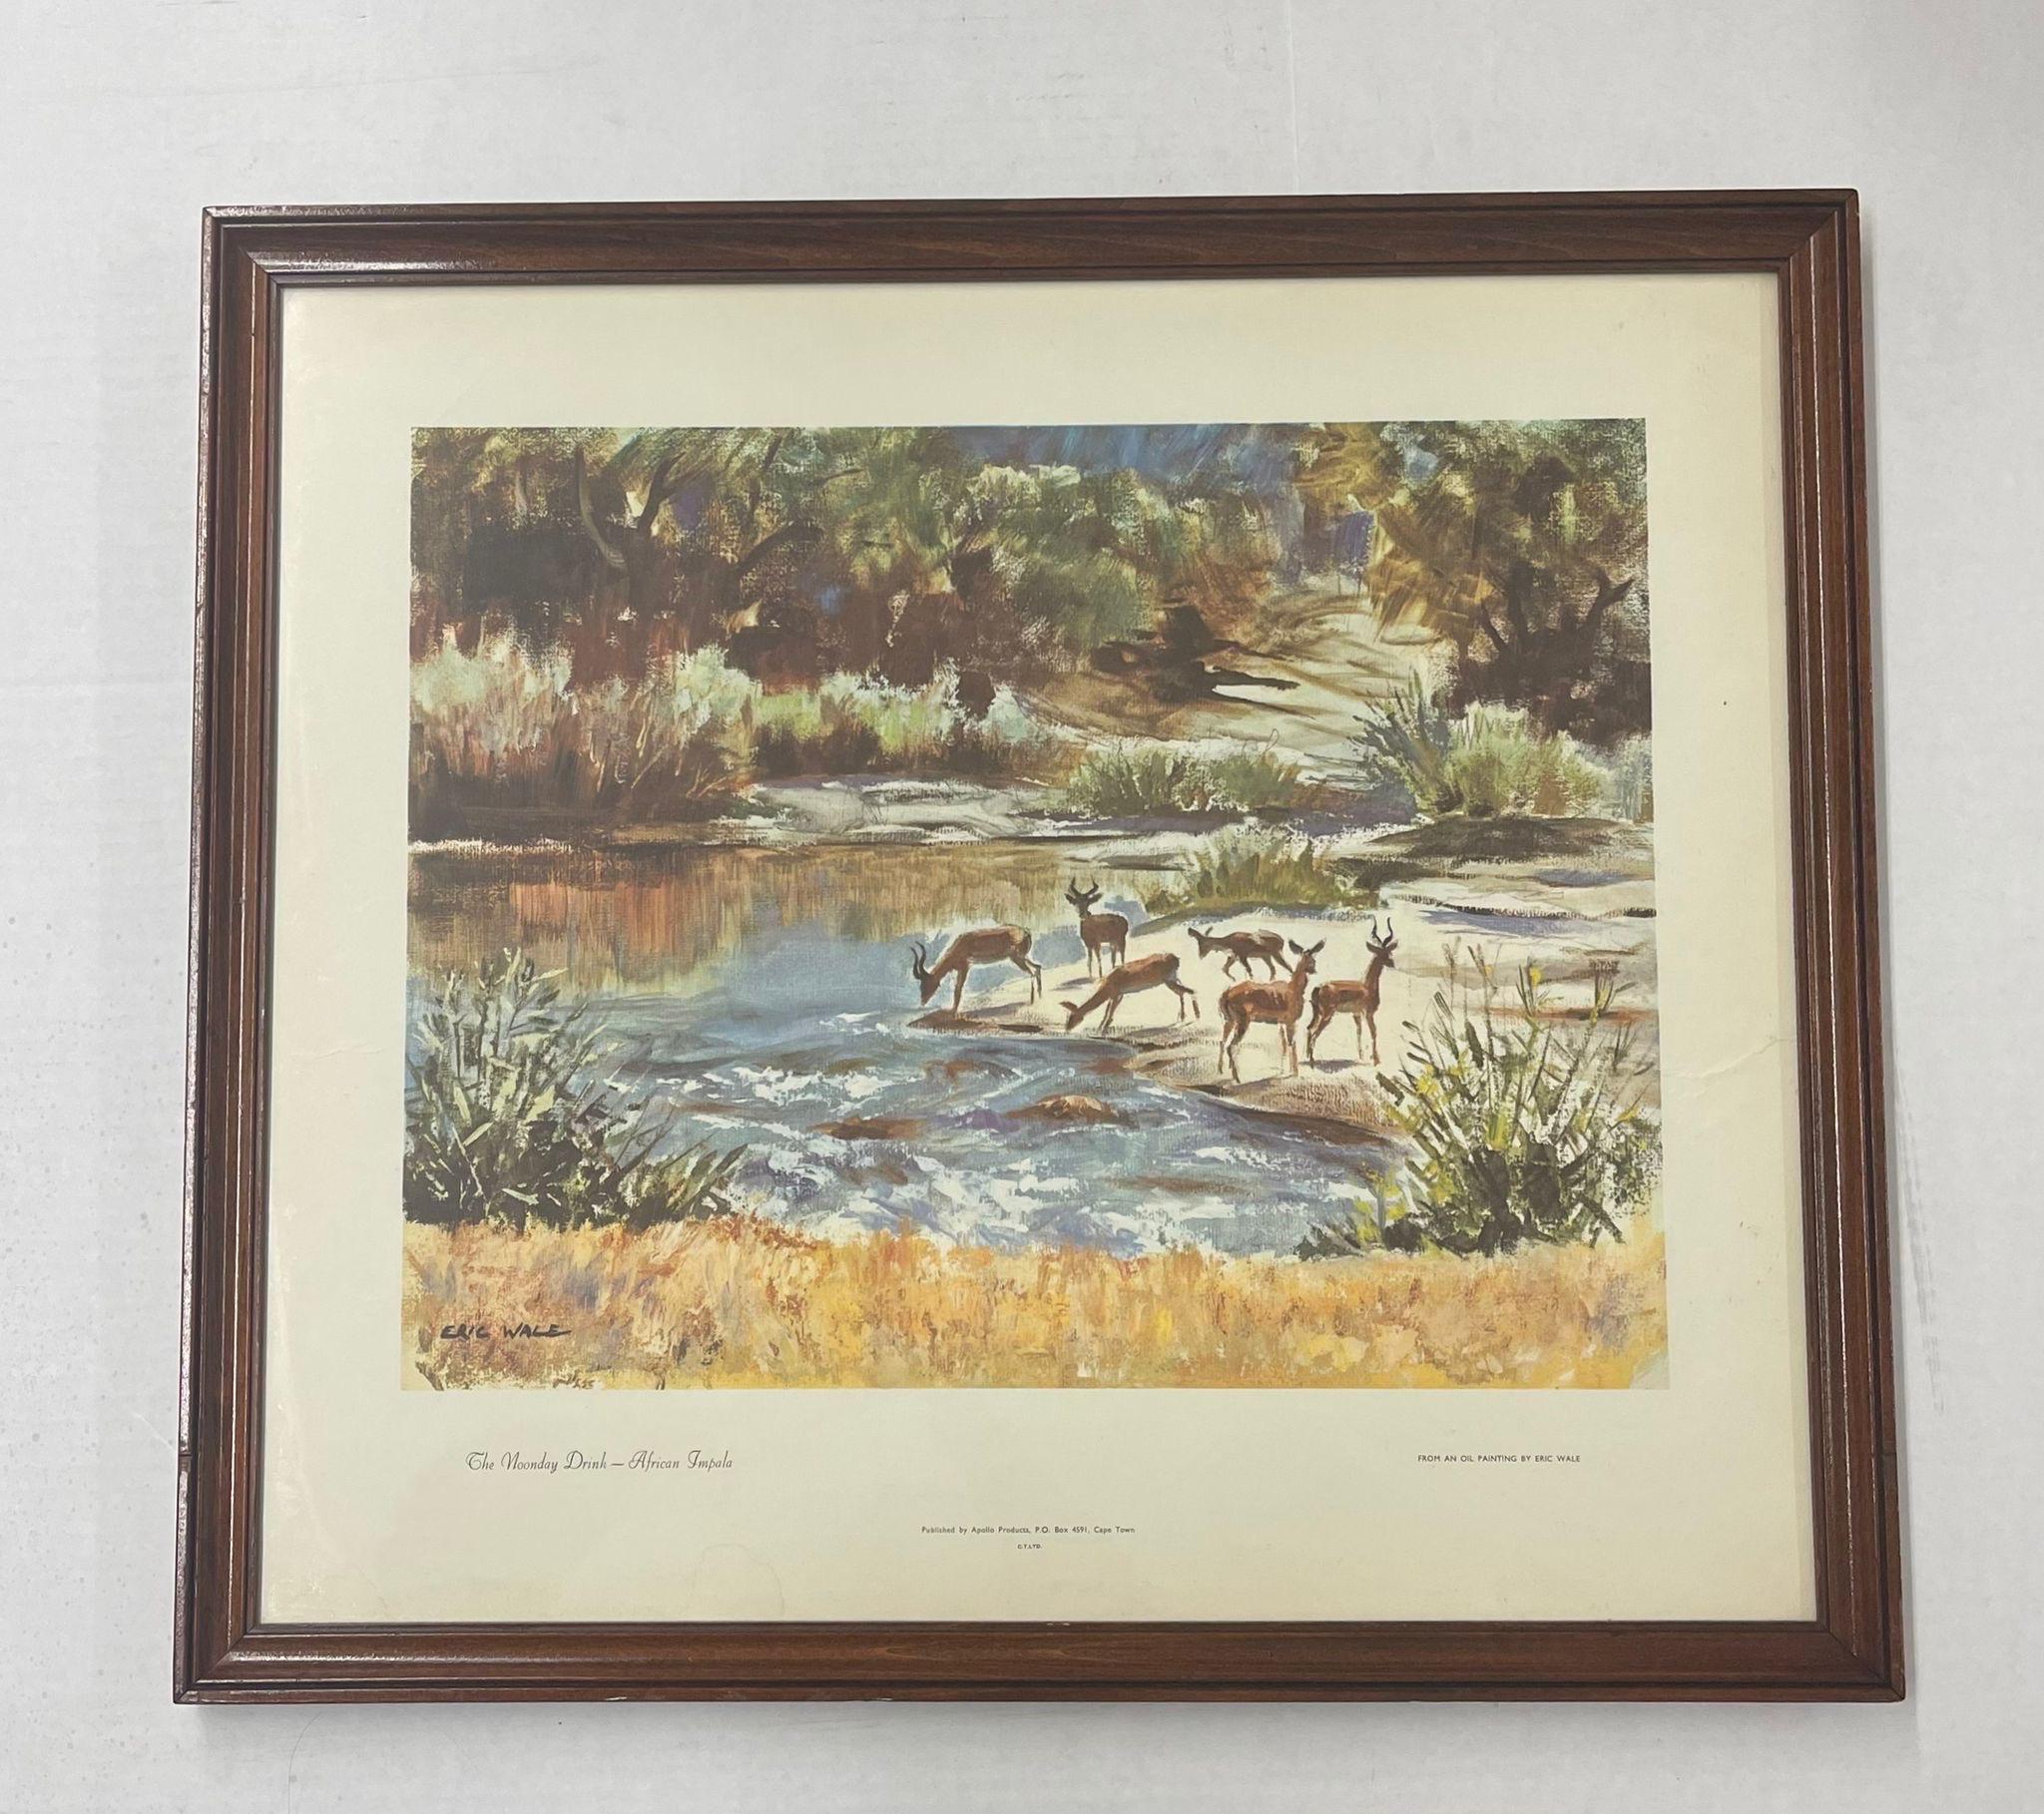 Vintage Framed print of African Landscape.?Text in the lower area of the print states that it was from oil painting by Eric Wale. Vintage Condition Consistent with Age.

Dimensions. 20 W ; 1/2 D ; 18 H